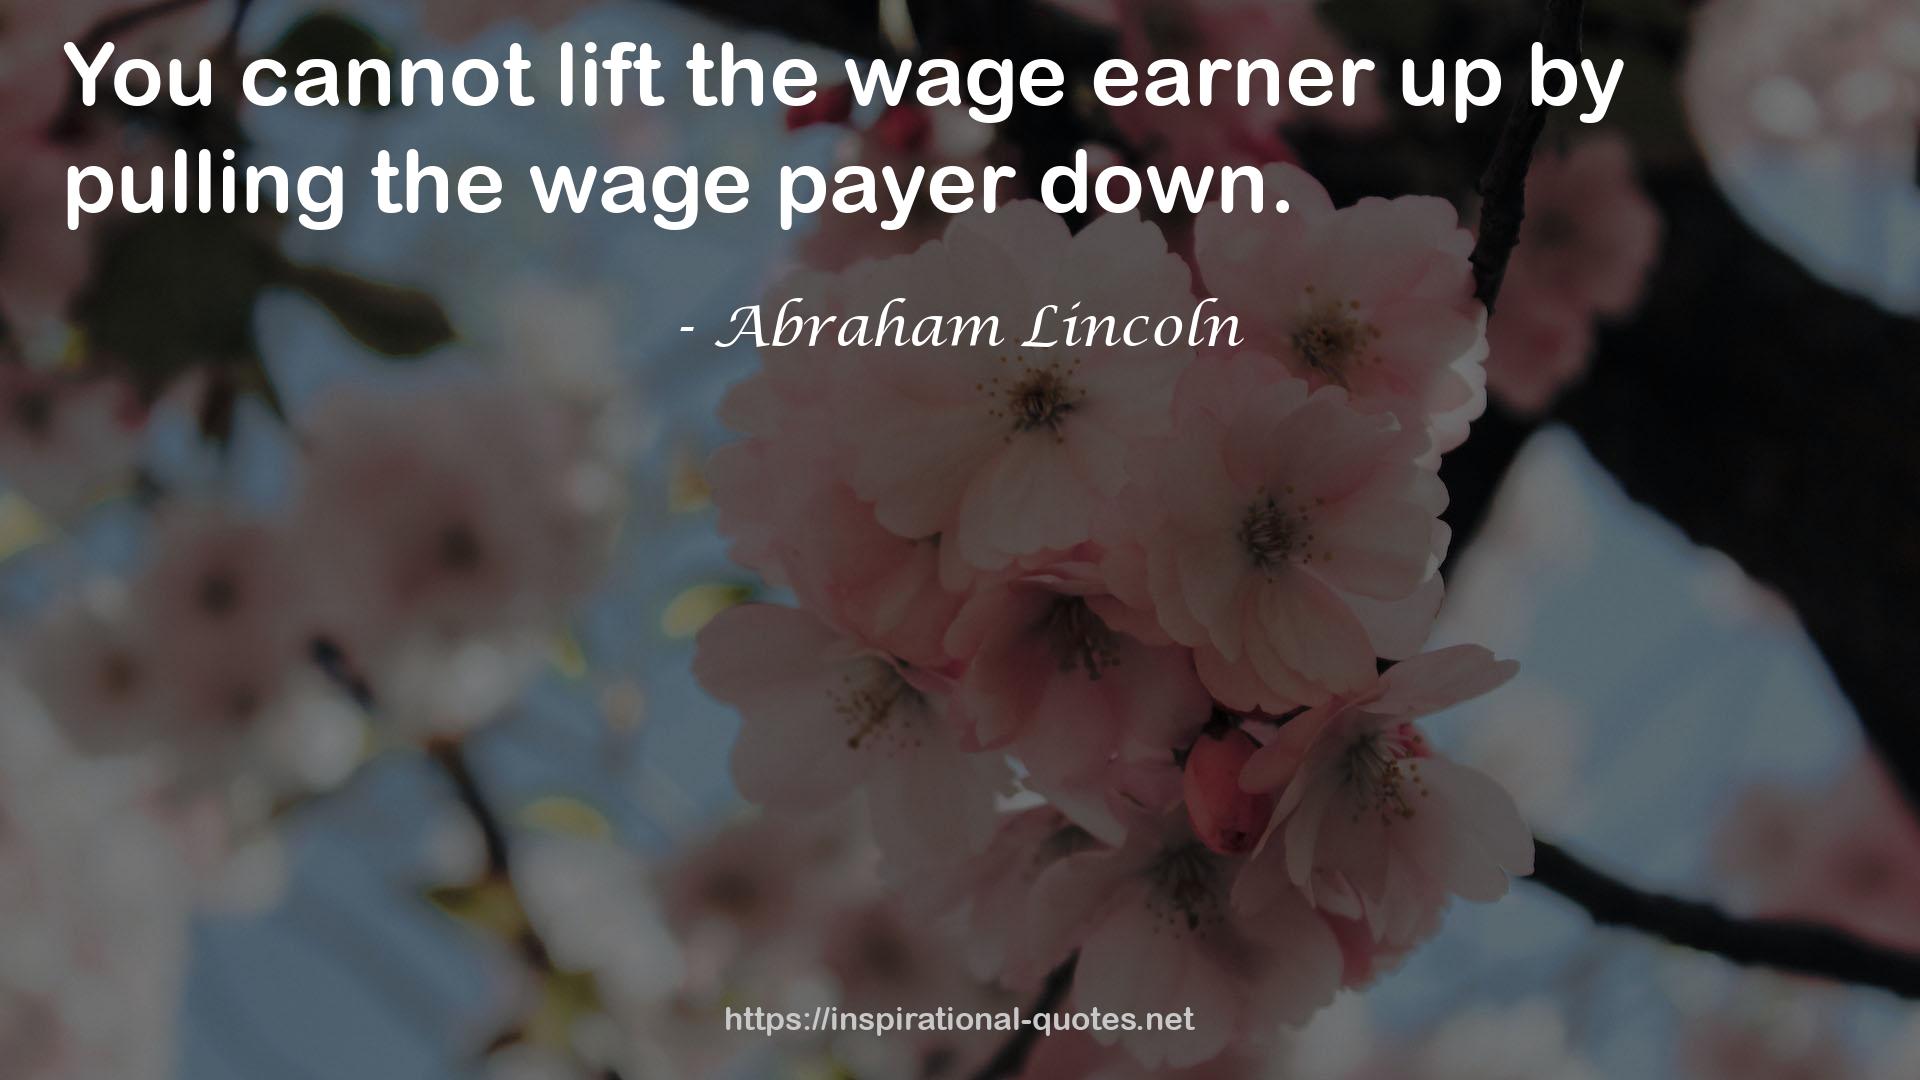 Abraham Lincoln QUOTES